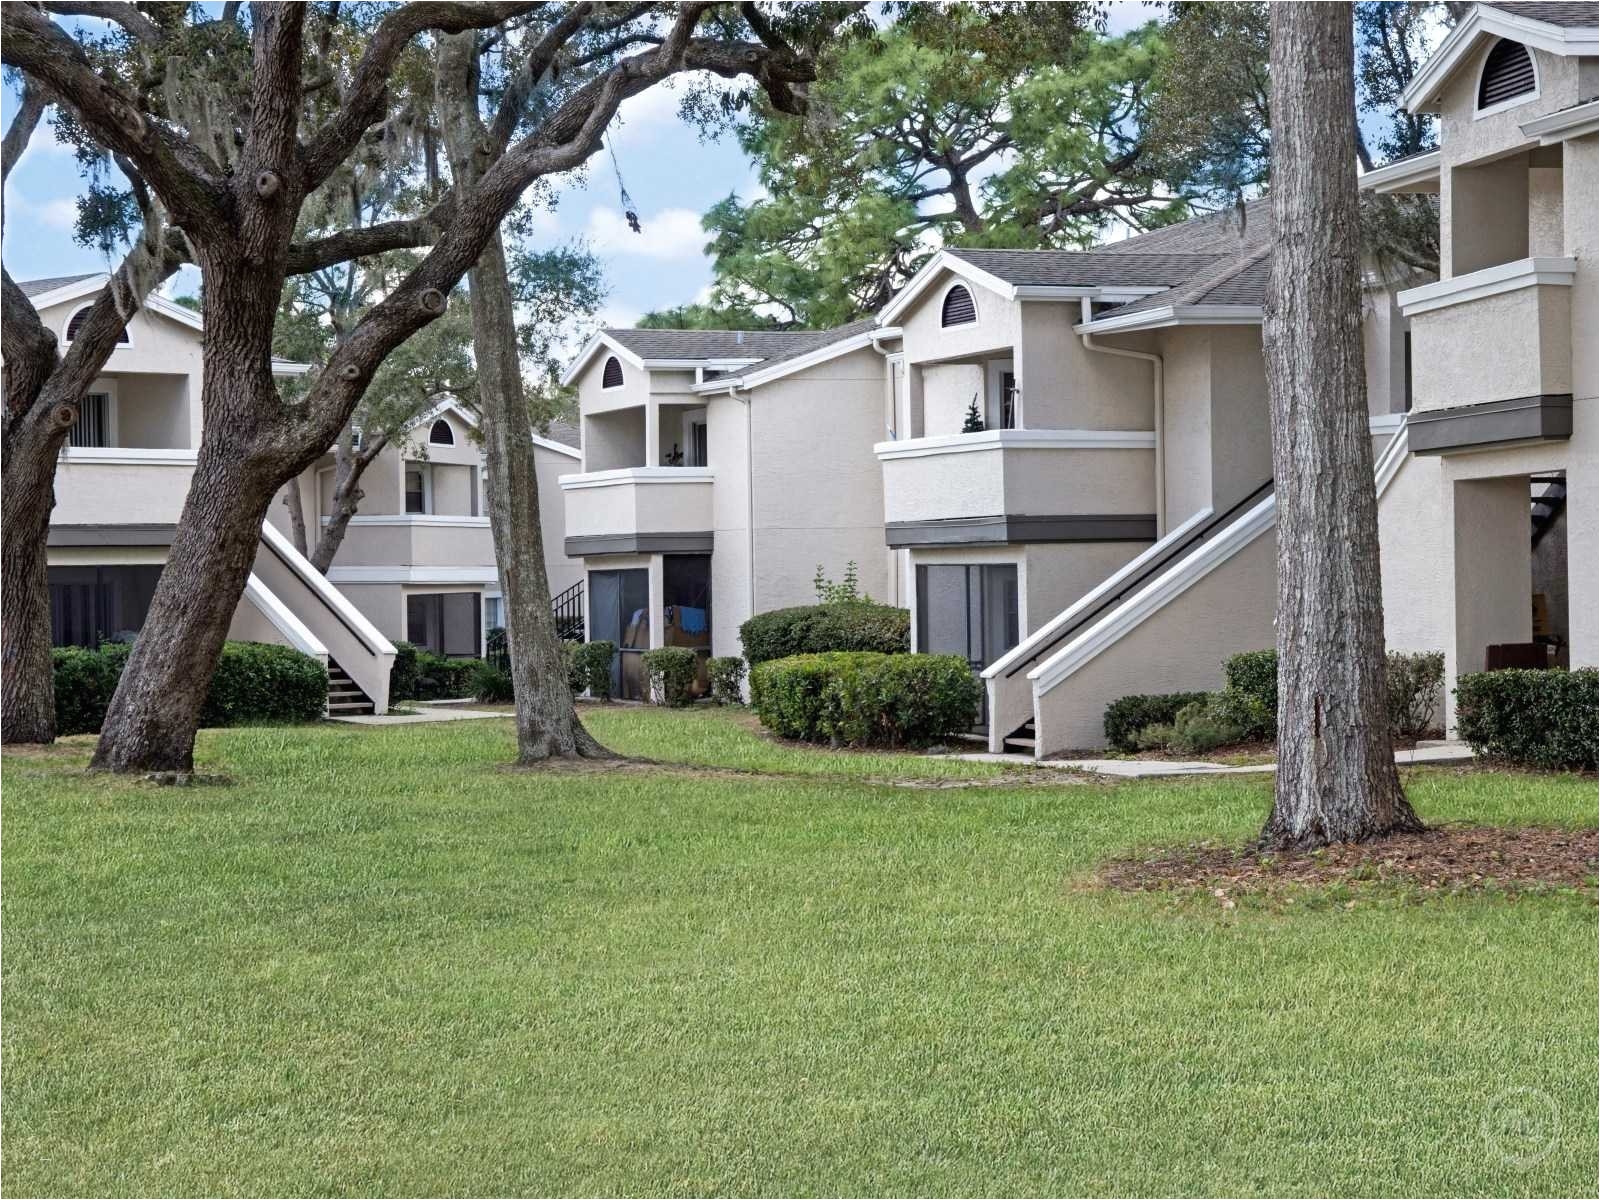 winter garden fl apartments fresh apartments winter garden fl awesome the park at highgate apartments of